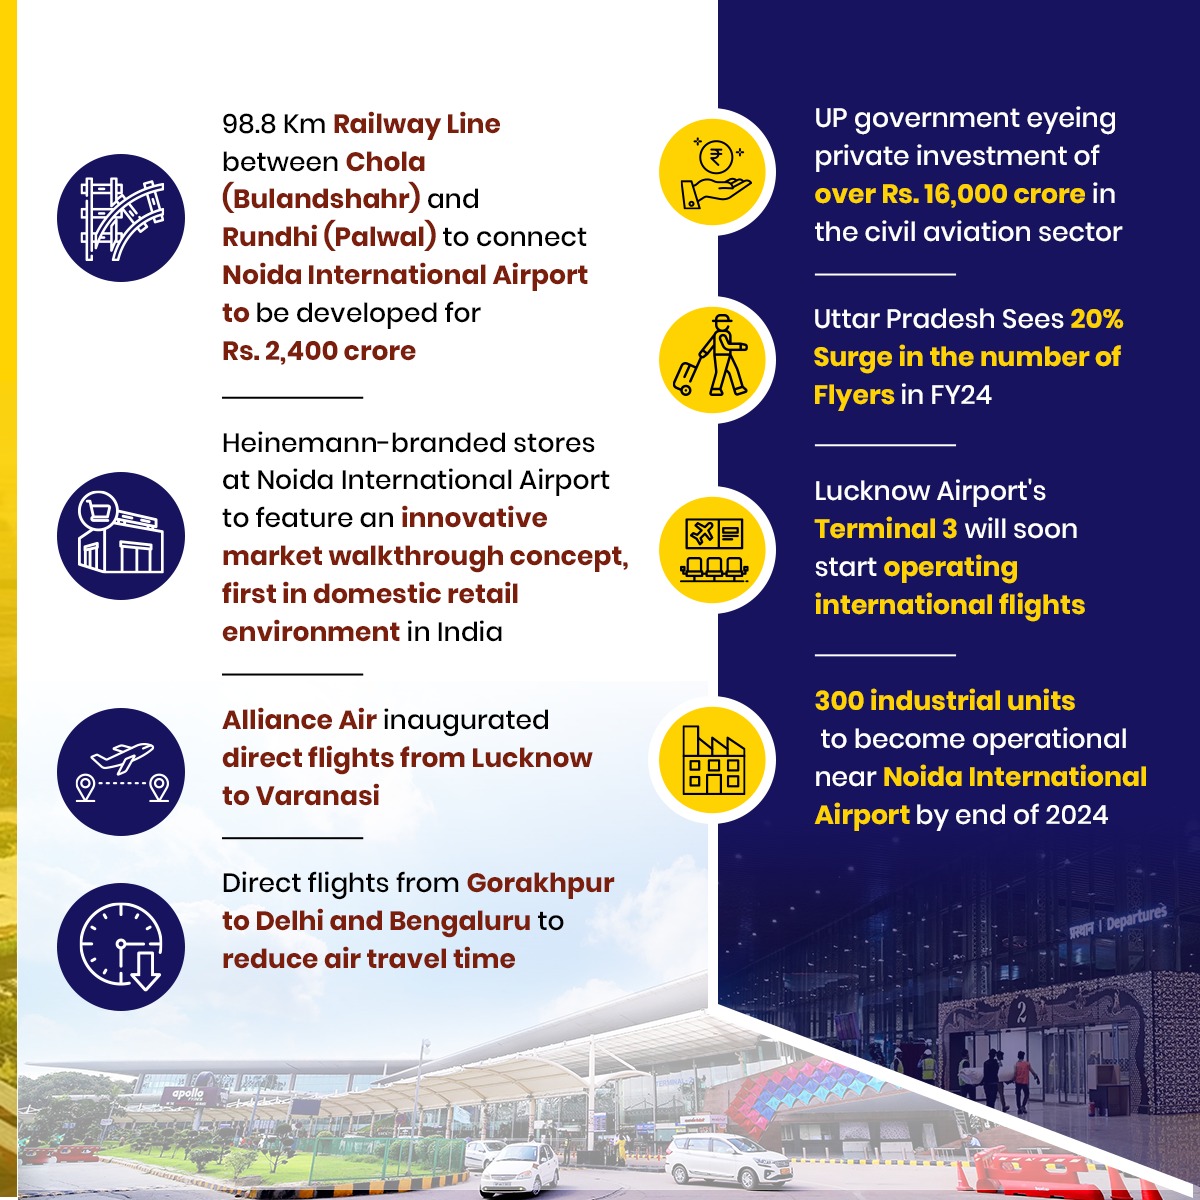 Civil aviation sector in the new Uttar Pradesh has witnessed significant milestones in infrastructure, connectivity, and operational efficiency with the unwavering support and guidance of Prime Minister Shri Narendra Modi ji and Chief Minister Shri Yogi Adityanath ji. Here is a